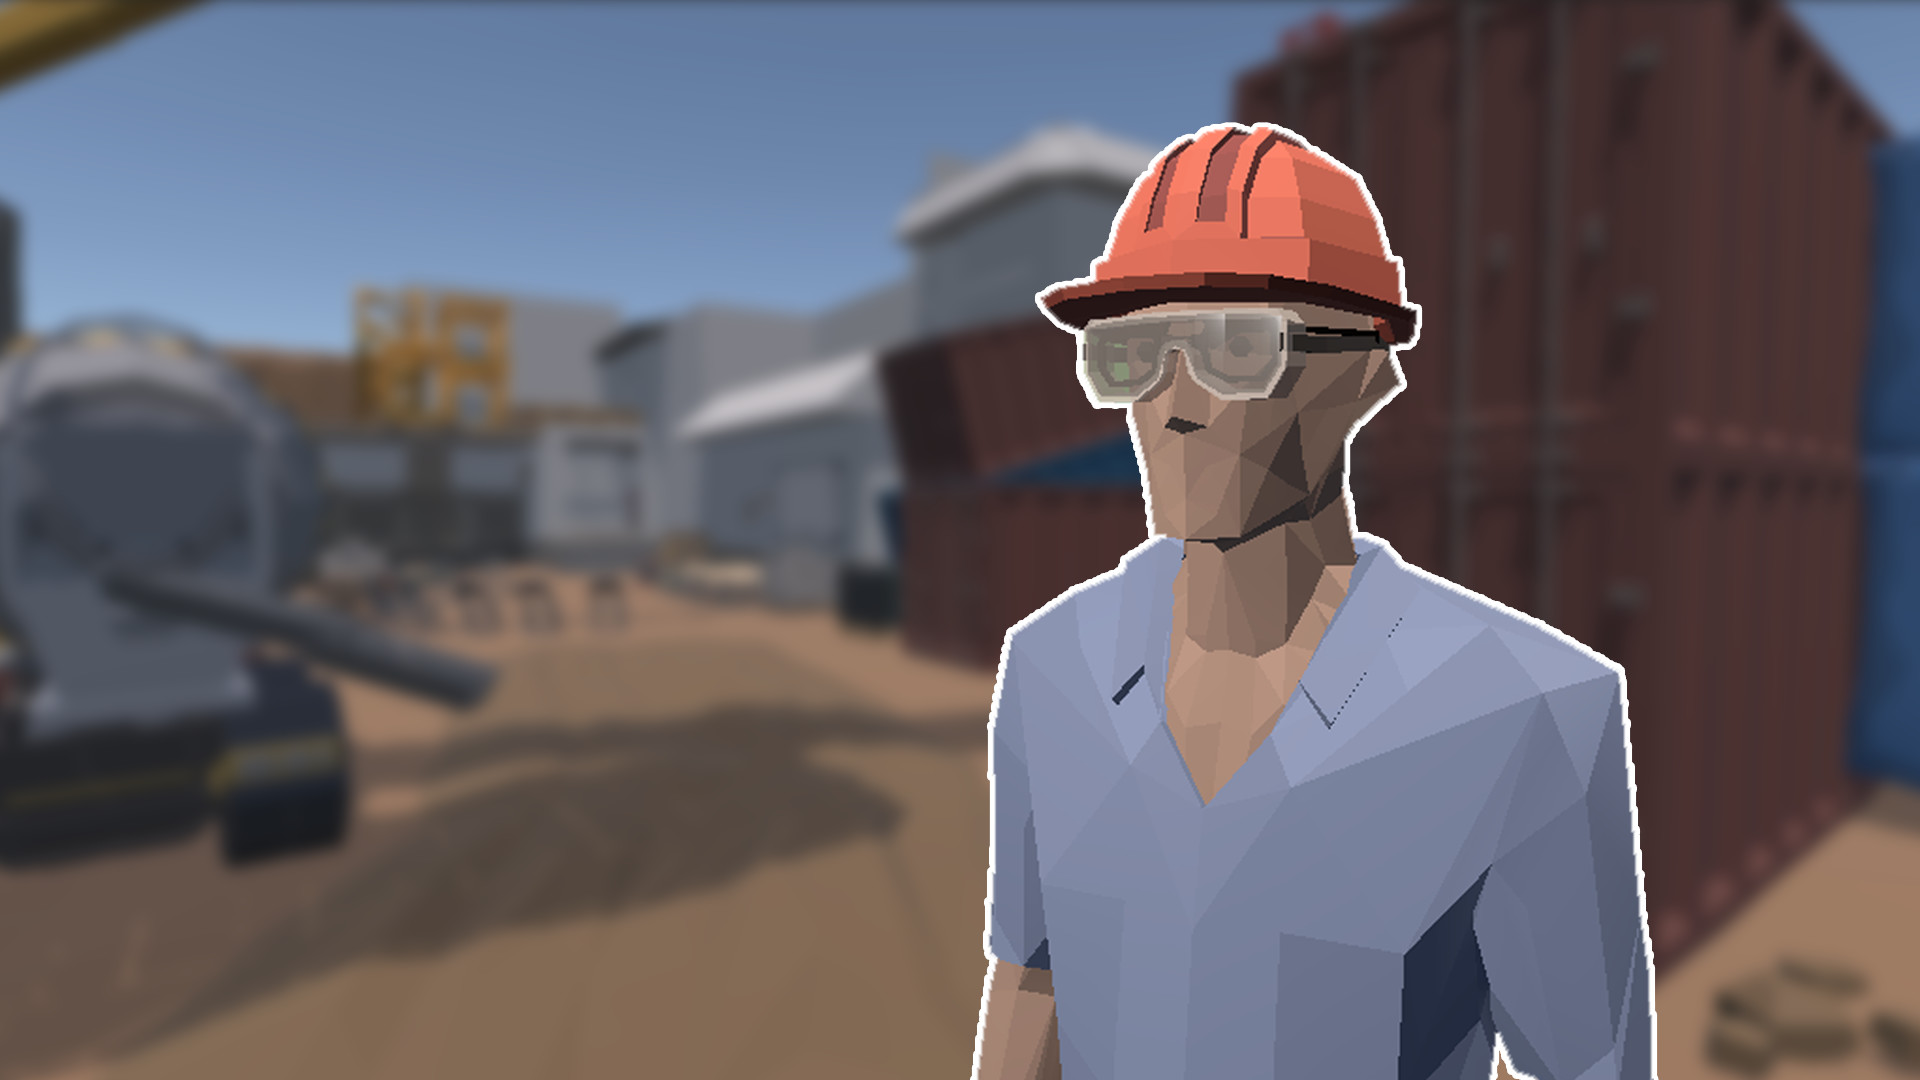 Deducto - Construction Hats Featured Screenshot #1